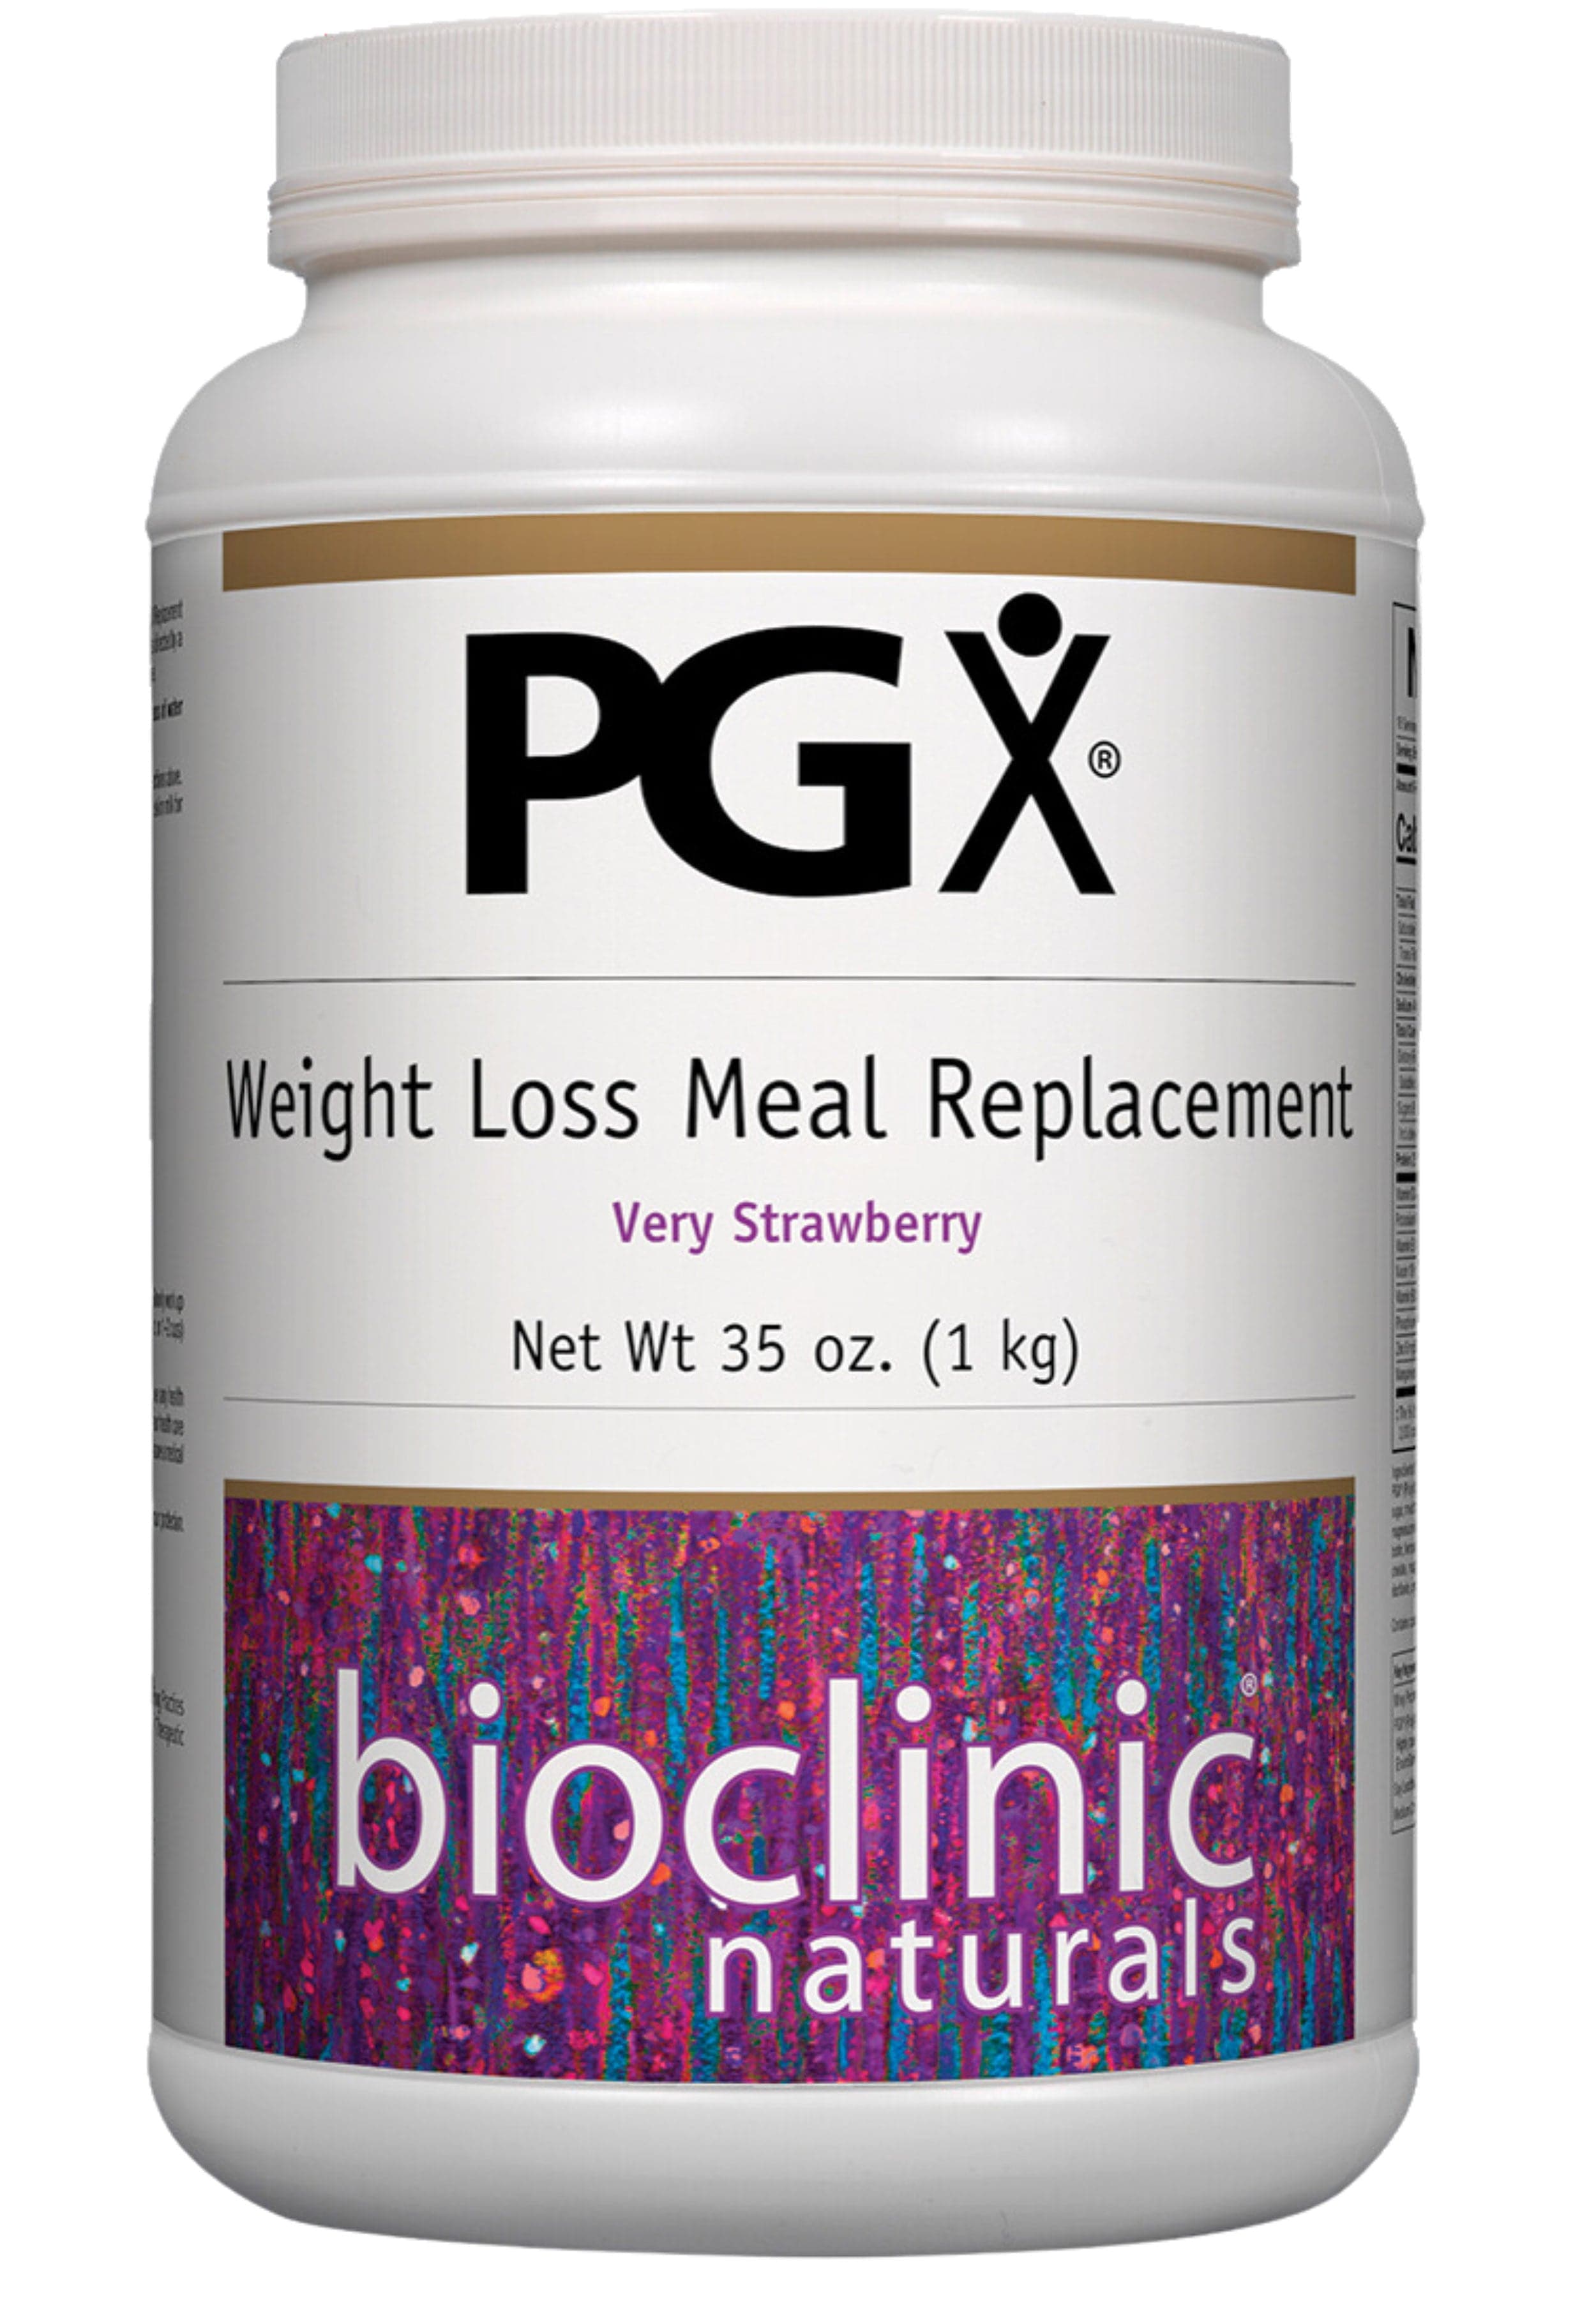 Bioclinic Naturals PGX Weight Loss Meal Replacement